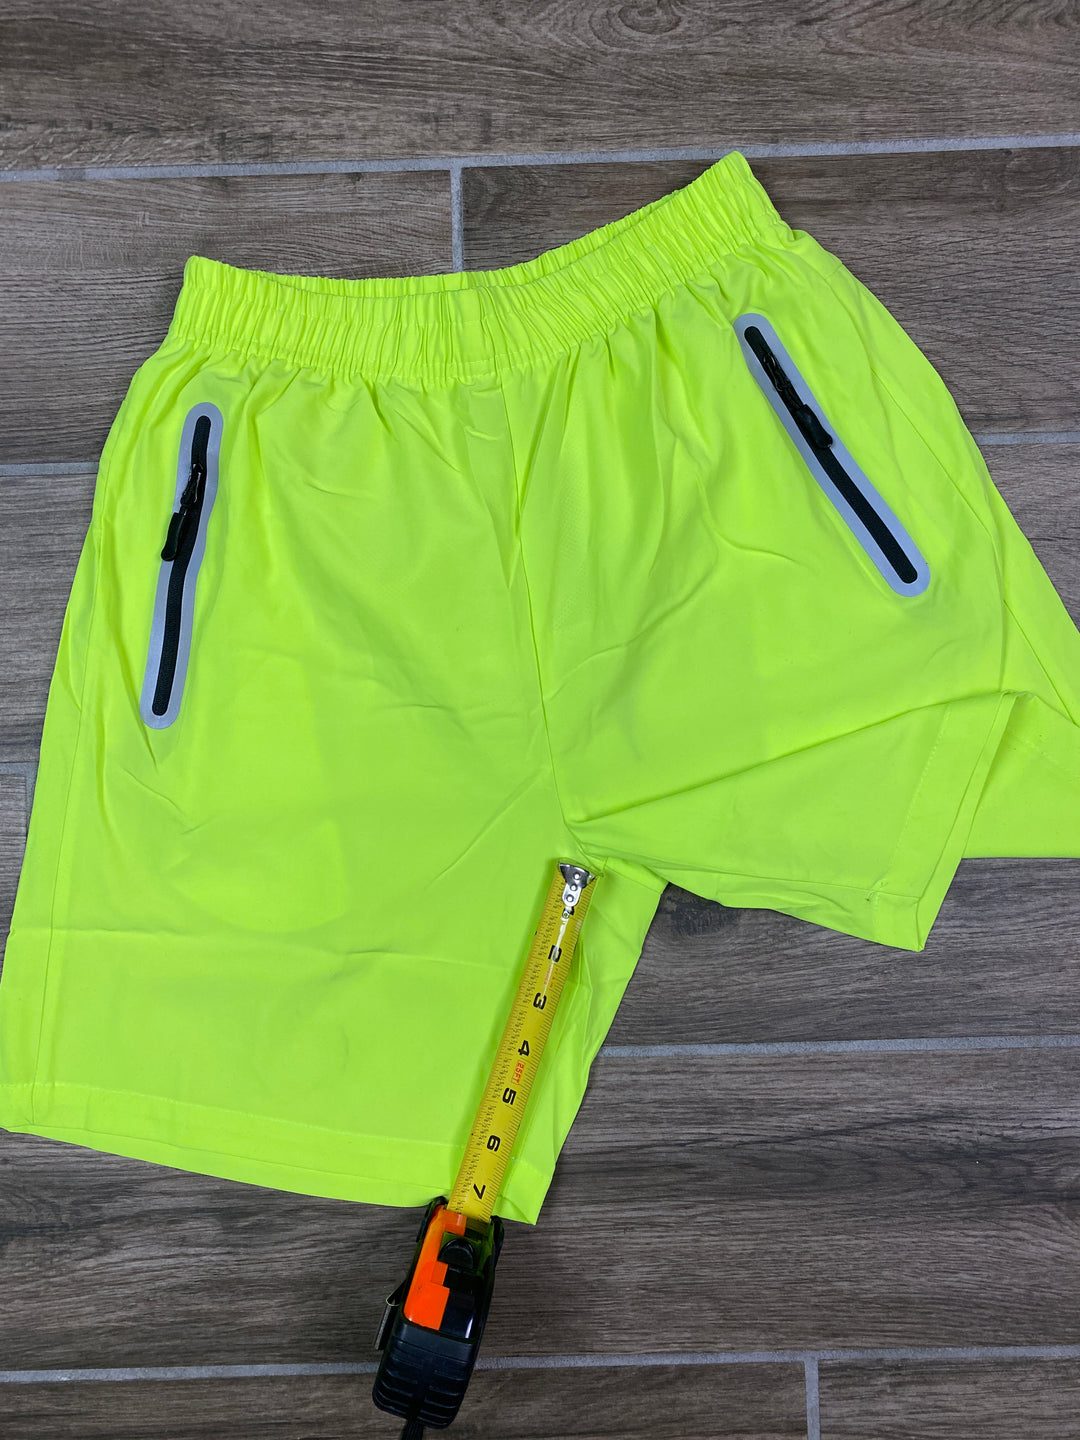 Performance Running Shorts with Mesh Lining inside!